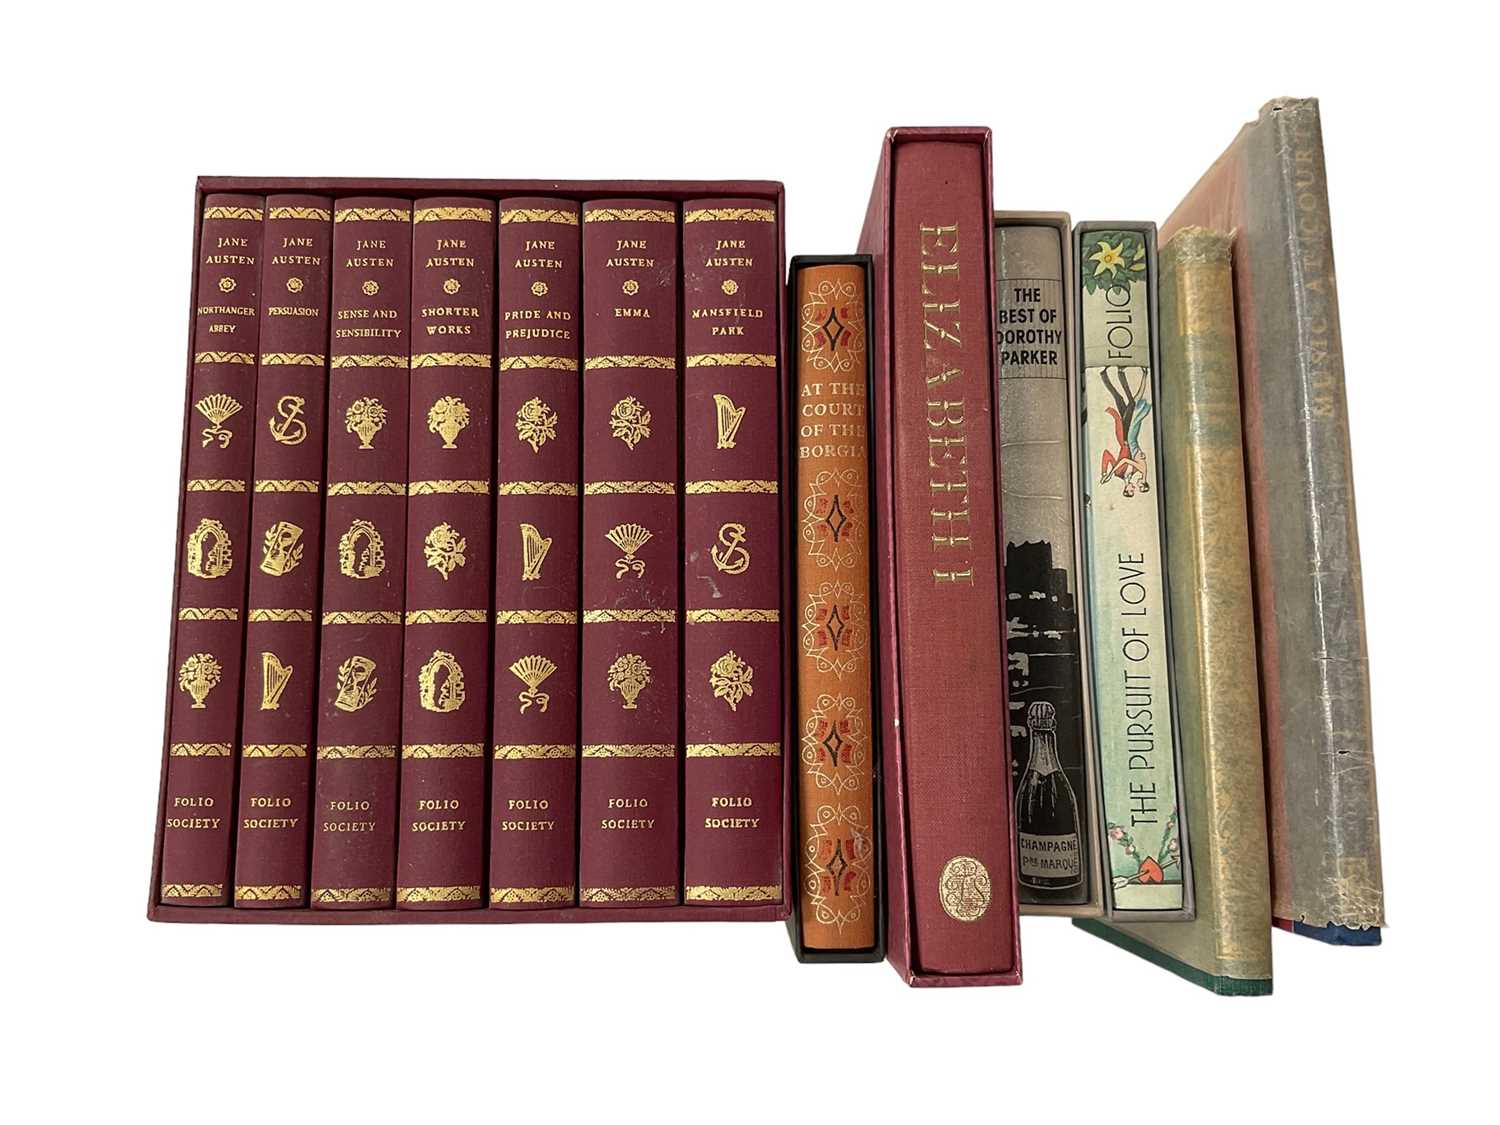 Lot 1734 - Folio Society - Works of Jane Austin, in box case, together with other Folio Society books